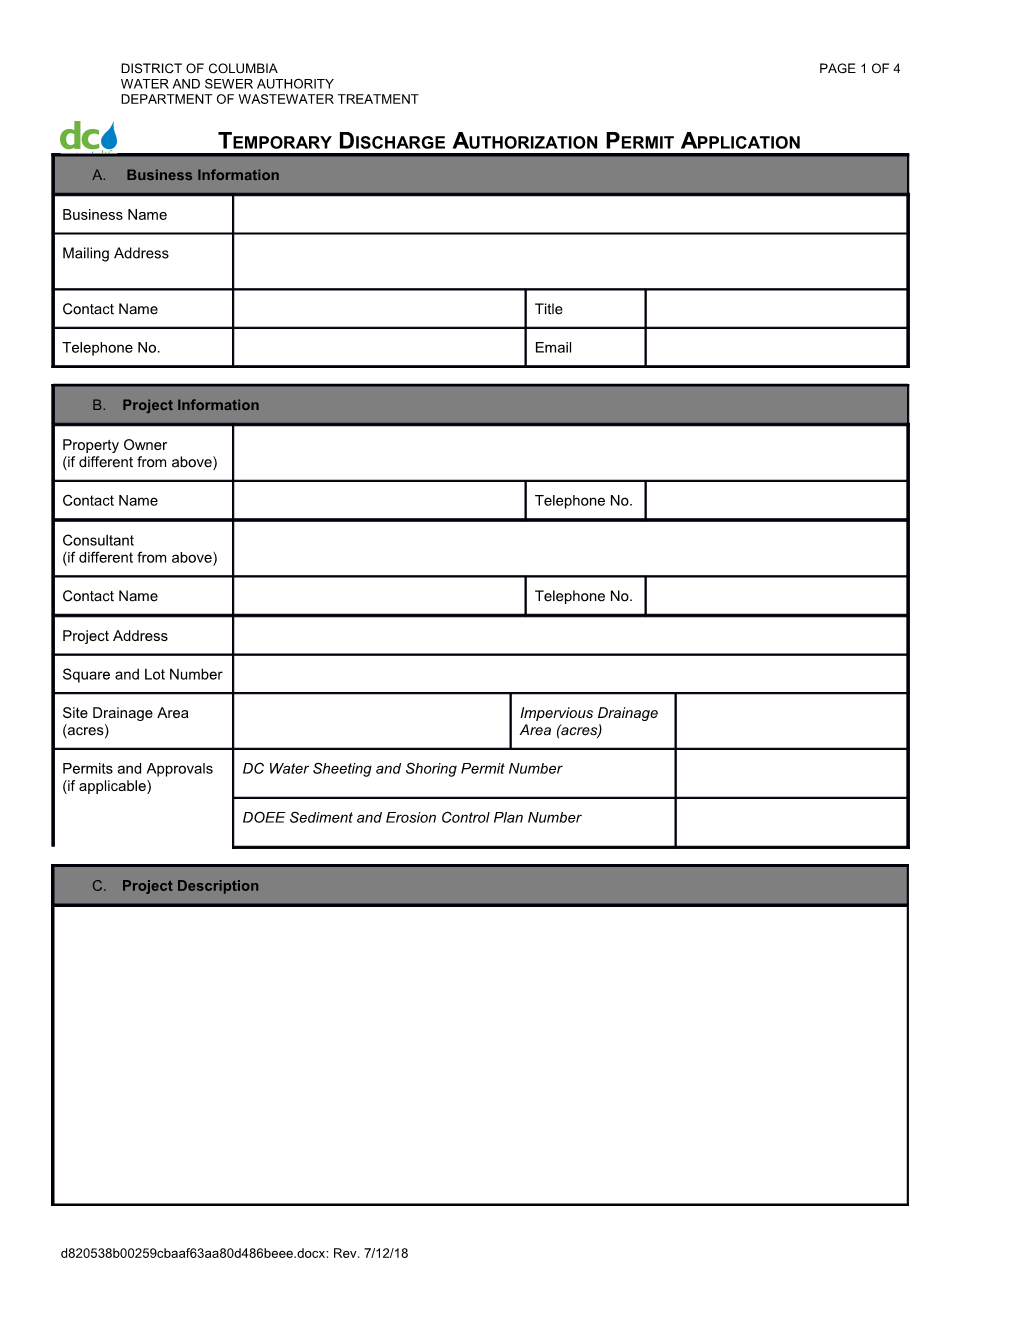 Temporary Discharge Authorization Permit Application